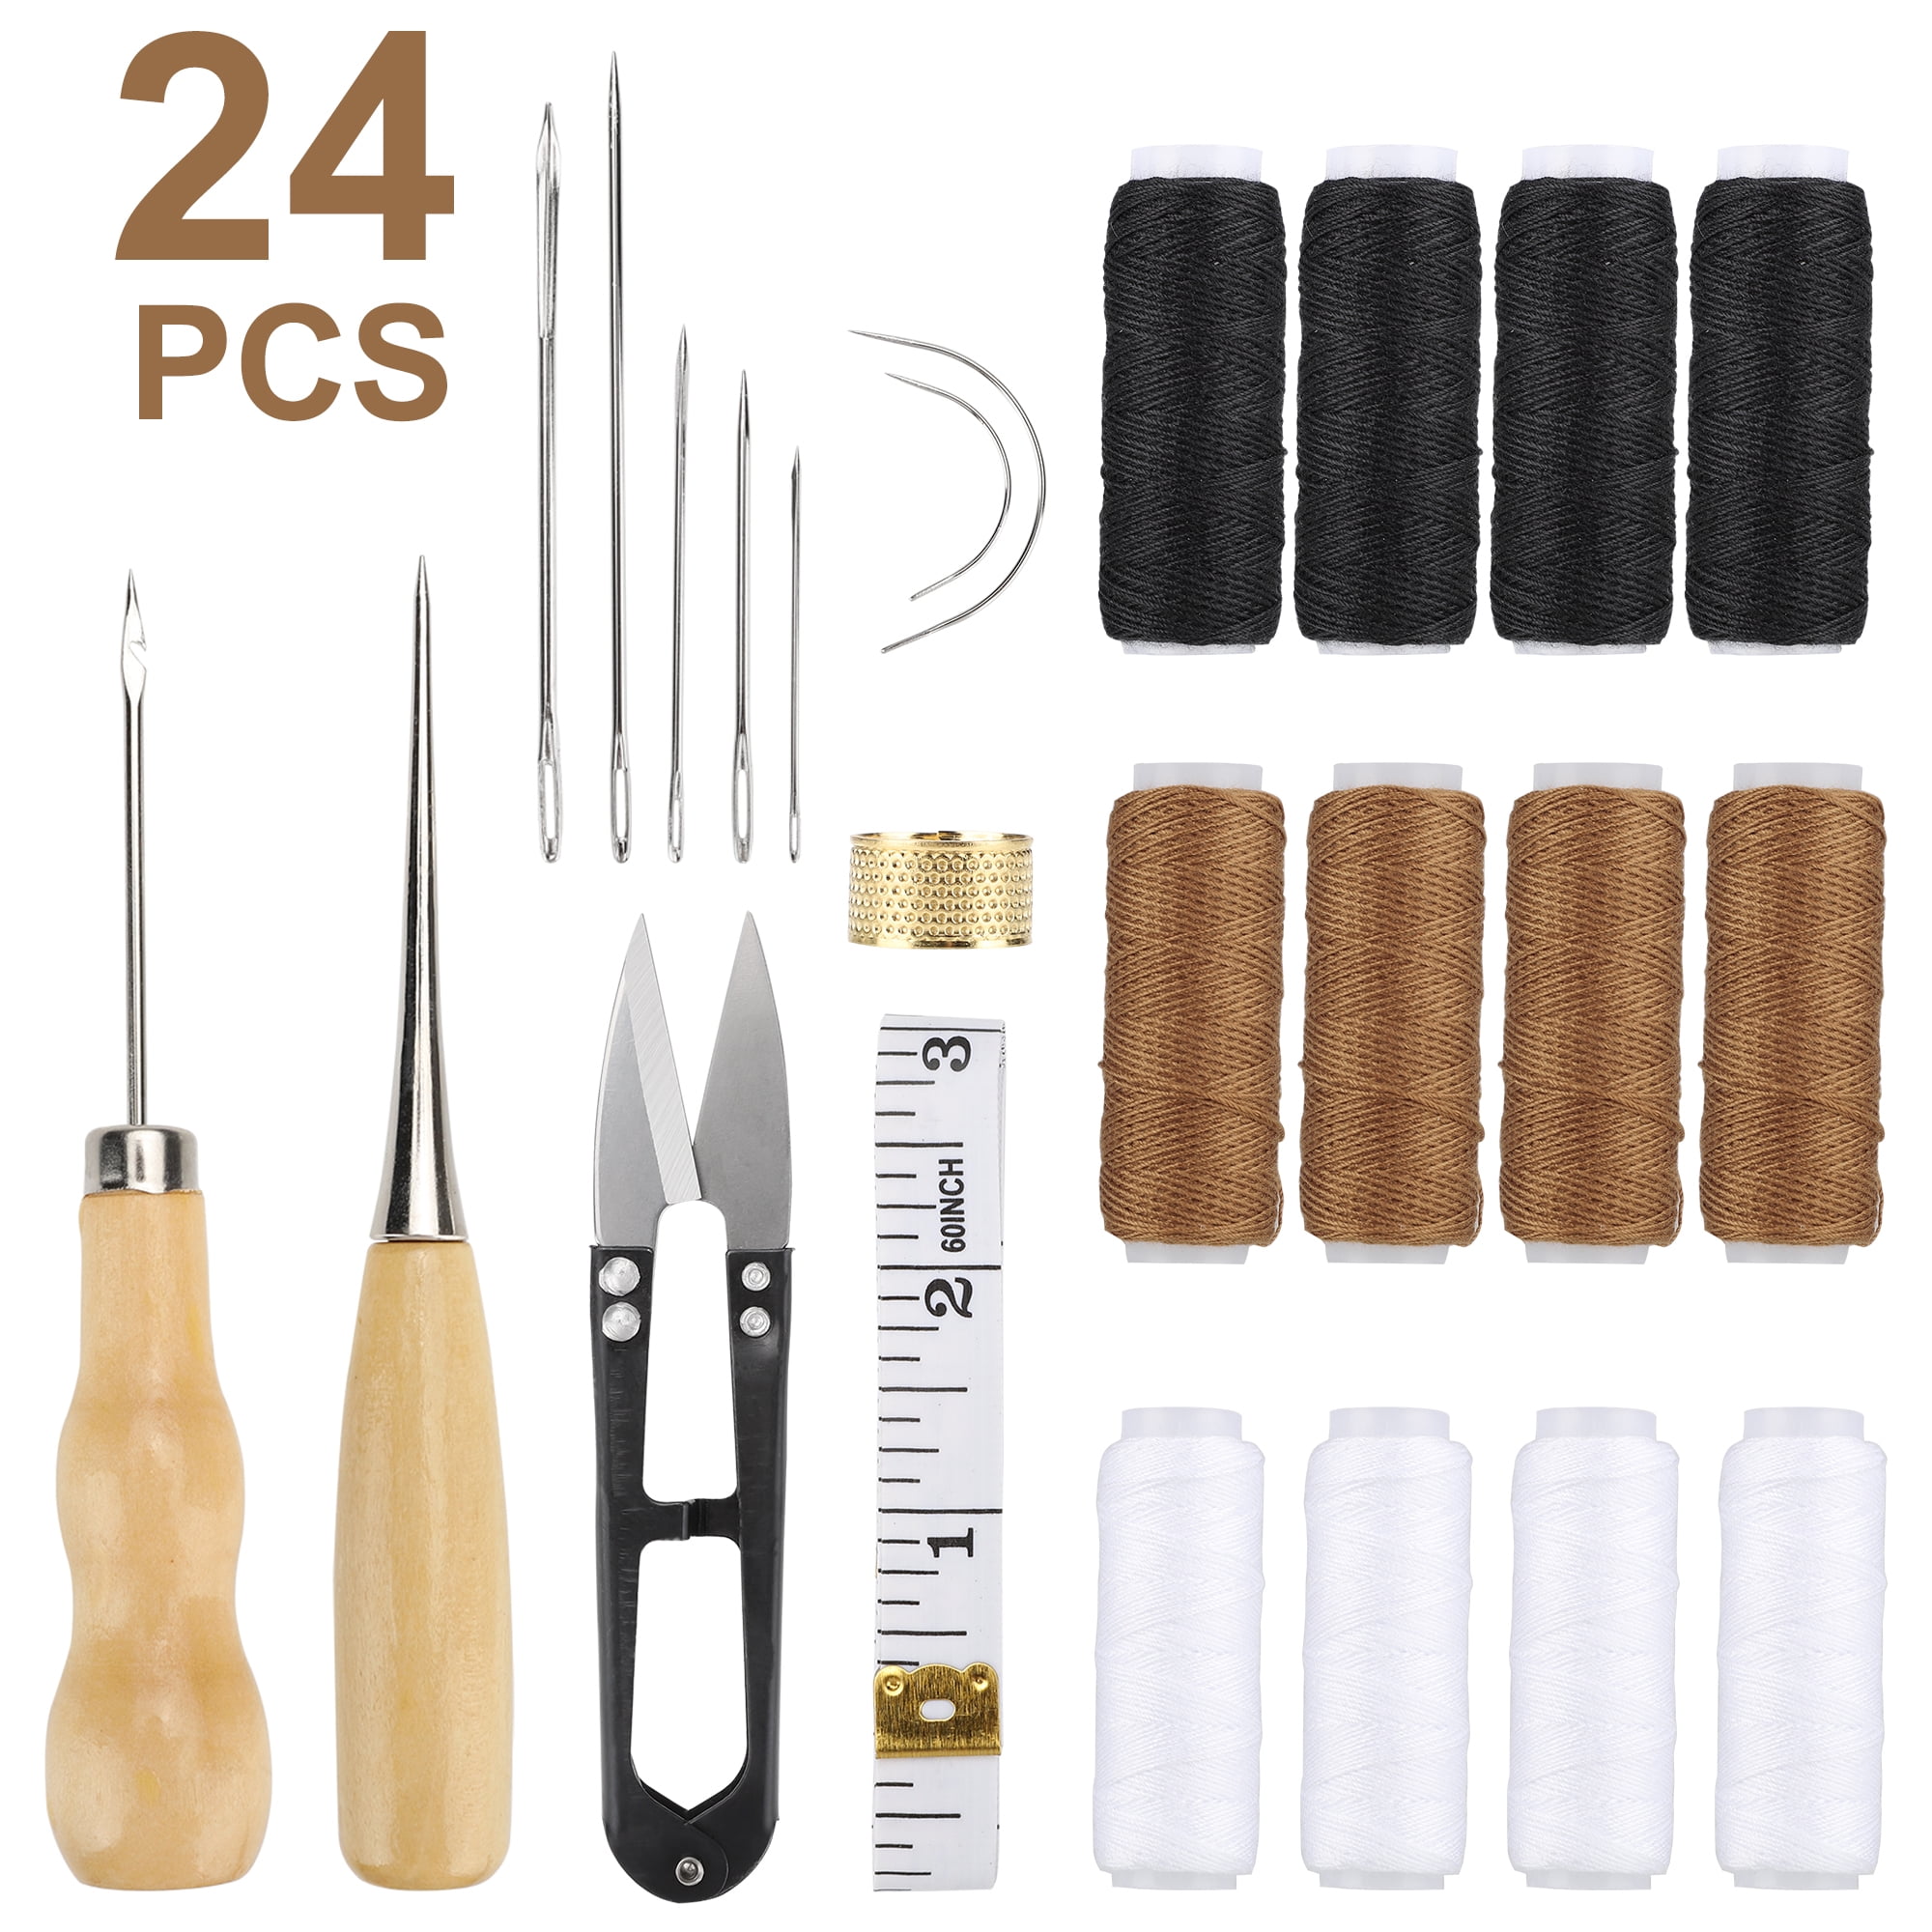 RUIYIQI Leather Craft Tool Kit 26 PCS Hand Stitching Tool Set Upholstery  Repair Kit with 12 Sewing Needles, 5 Waxed Thread, Tape Measure and Thimble